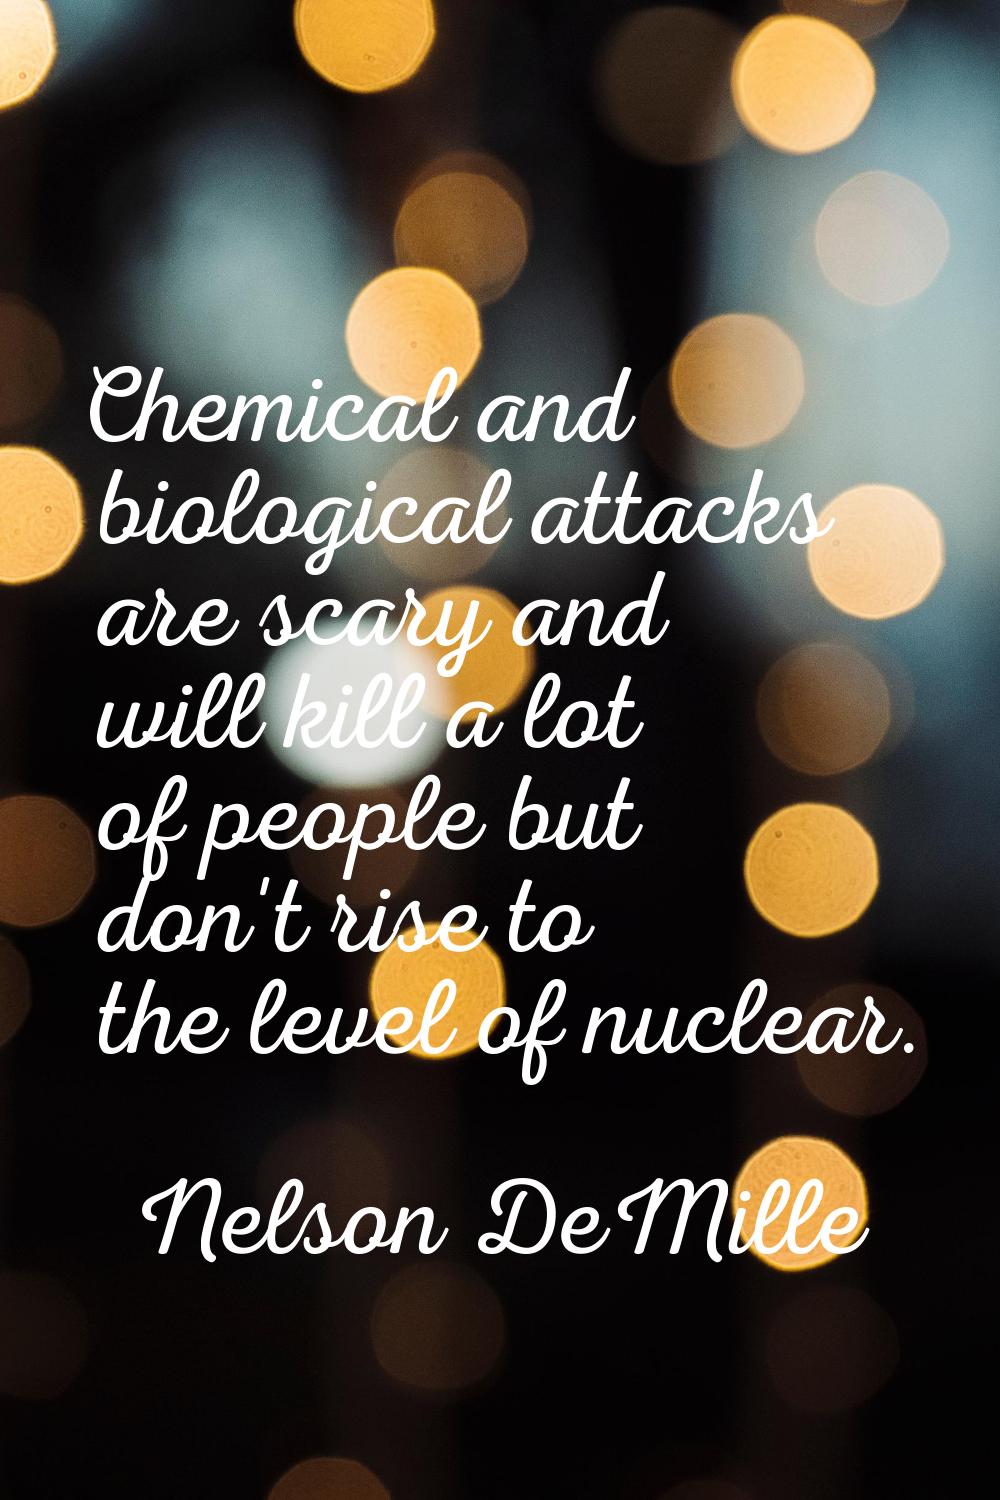 Chemical and biological attacks are scary and will kill a lot of people but don't rise to the level